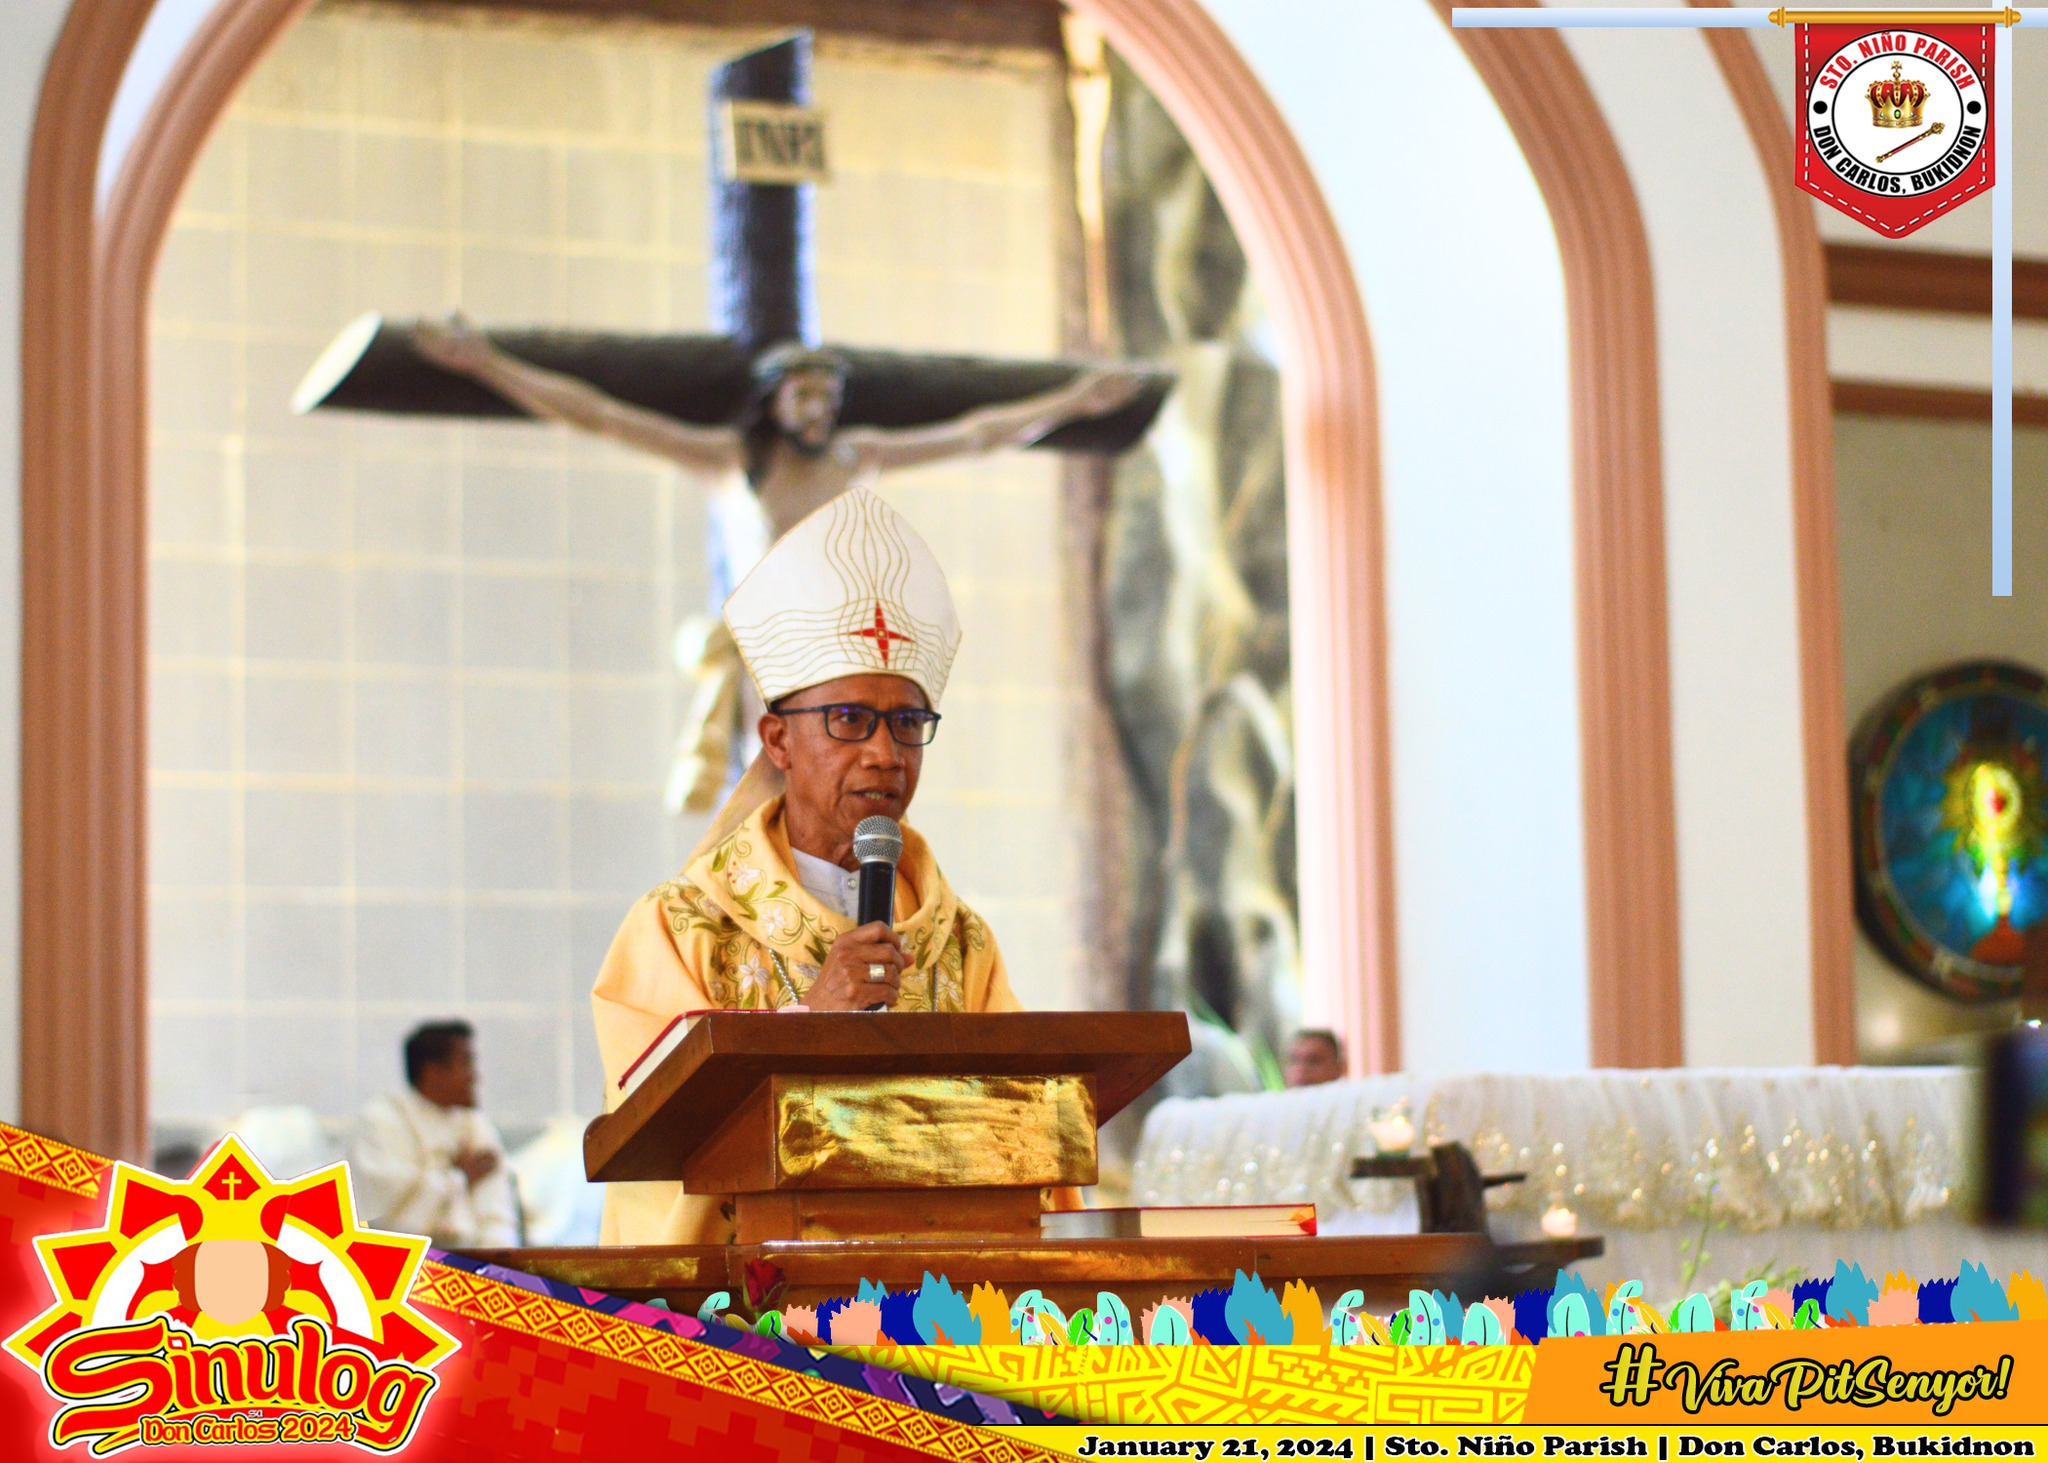 Bishop Noel P. Pedregosa of the Diocese of Malaybalay leads a  Pontifical High Mass, on January 21, 2024 for the feast day.